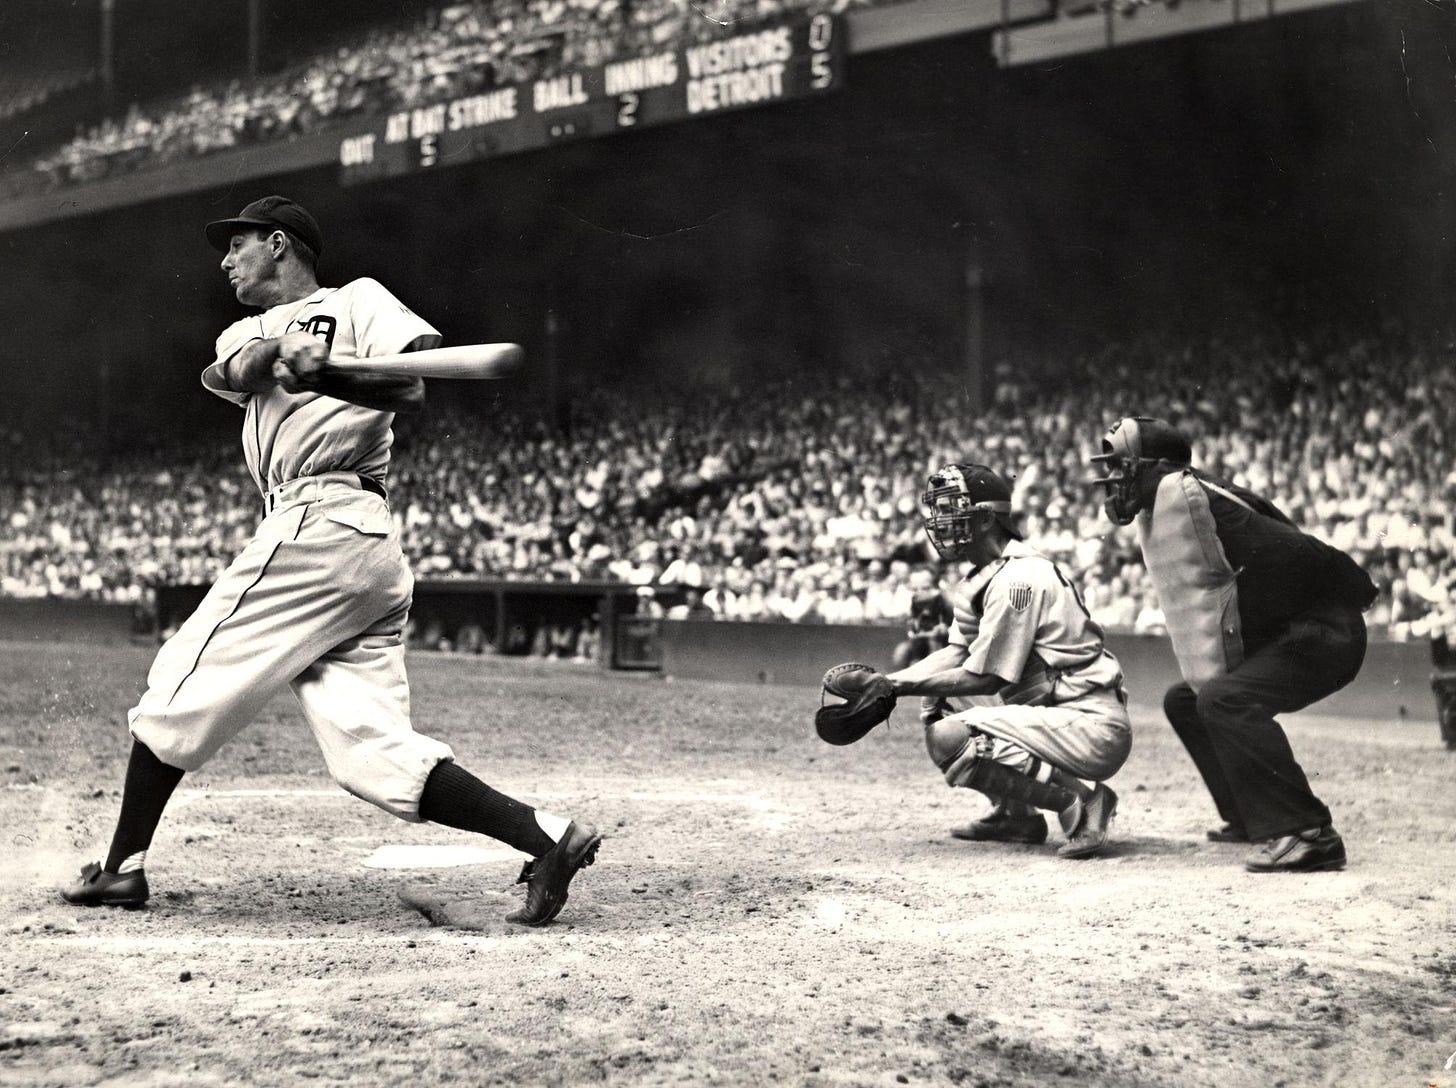 (From August of 1945) Detroit Tigers legend, first baseman Hank Greenberg swings at a pitch.